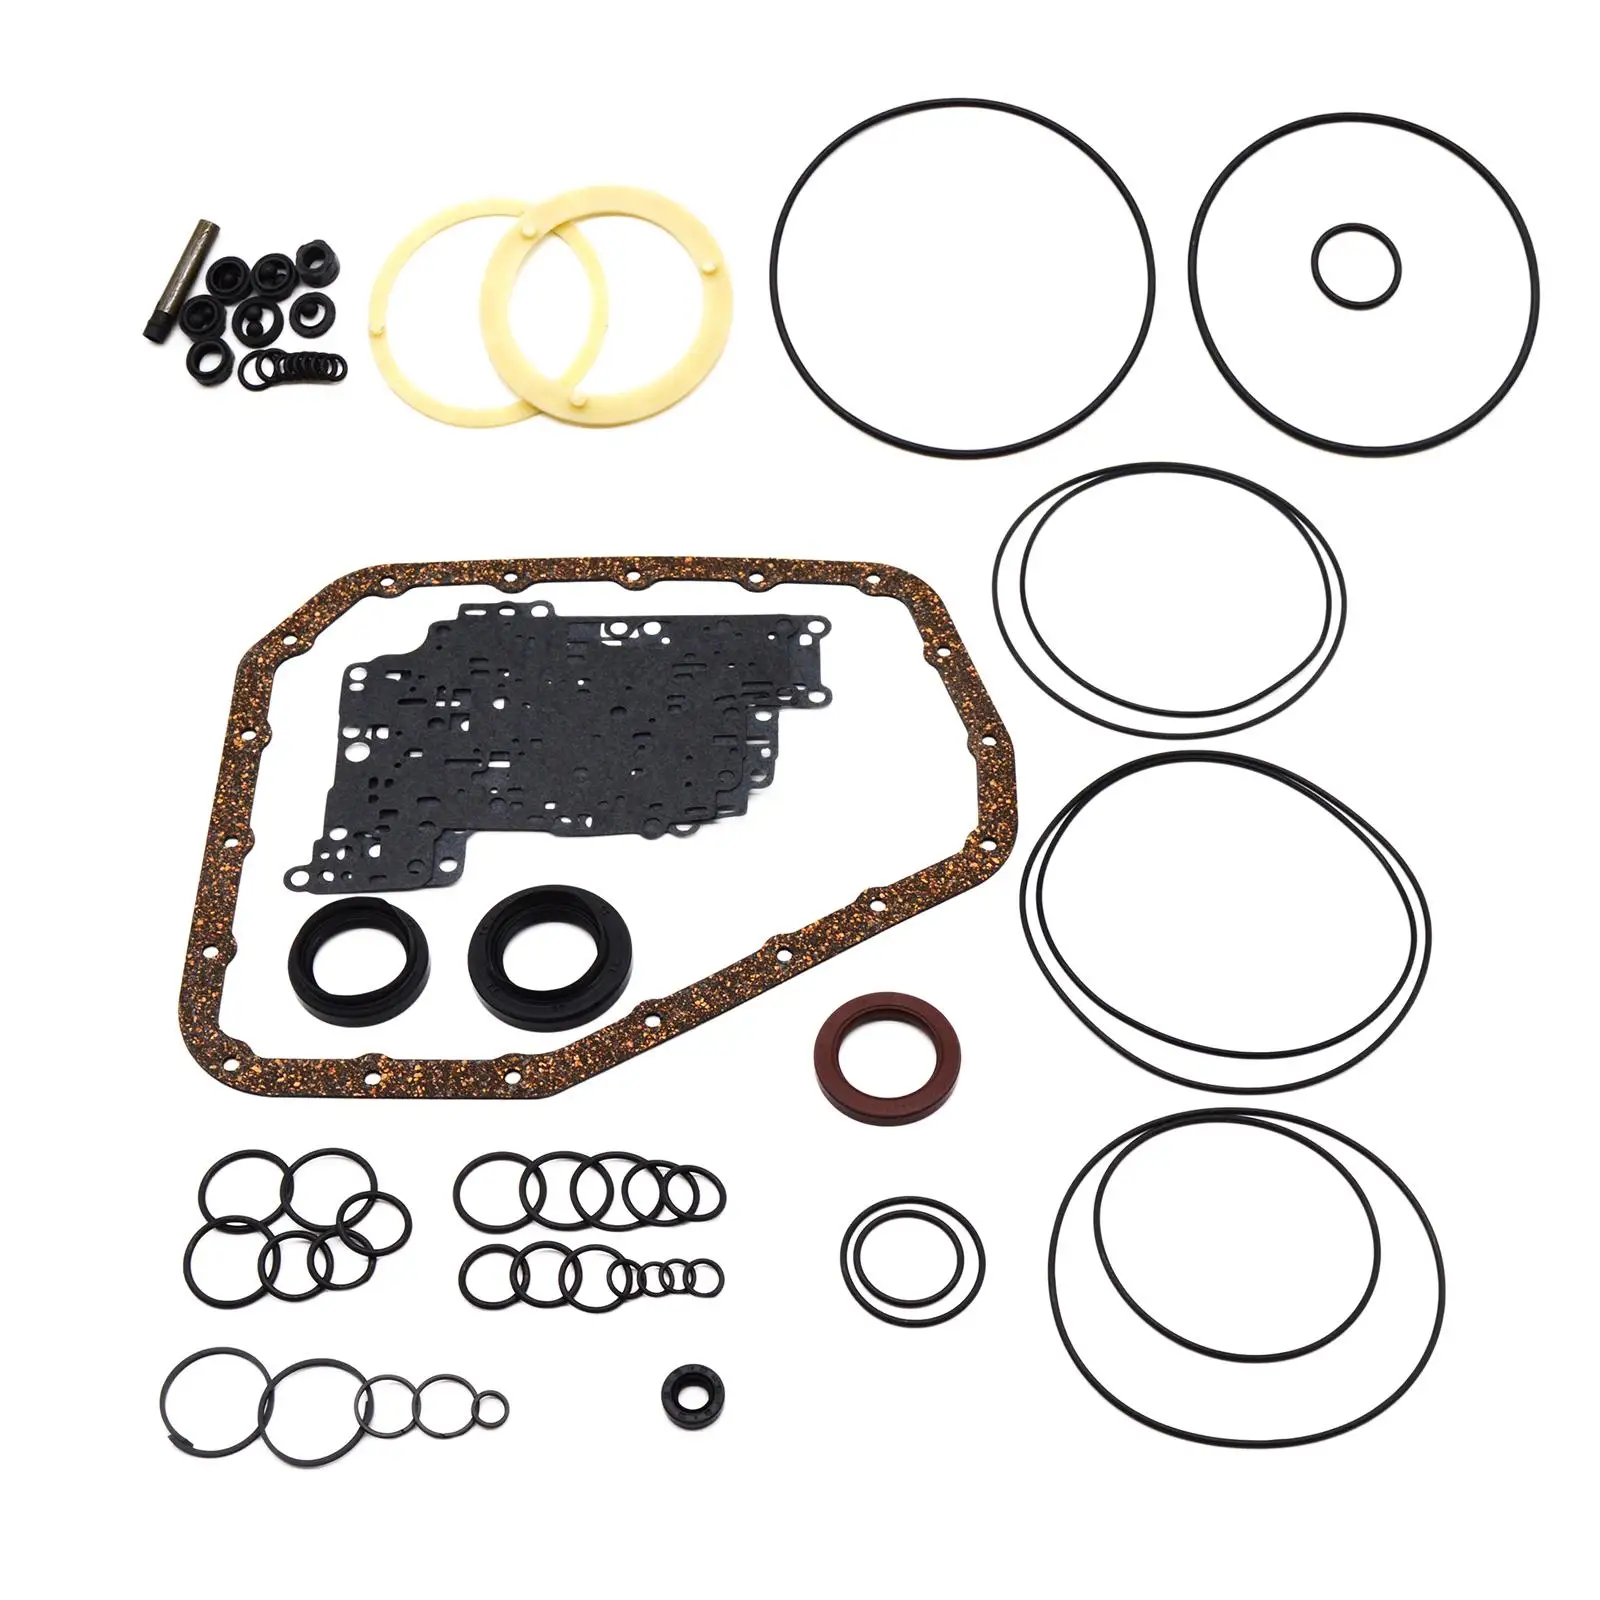 Automatic Transmission Repair Kit Overhaul 81-40LE 137002A Transmission Rebuild Kit for Buick Excelle 1.6 Cushion Rubber